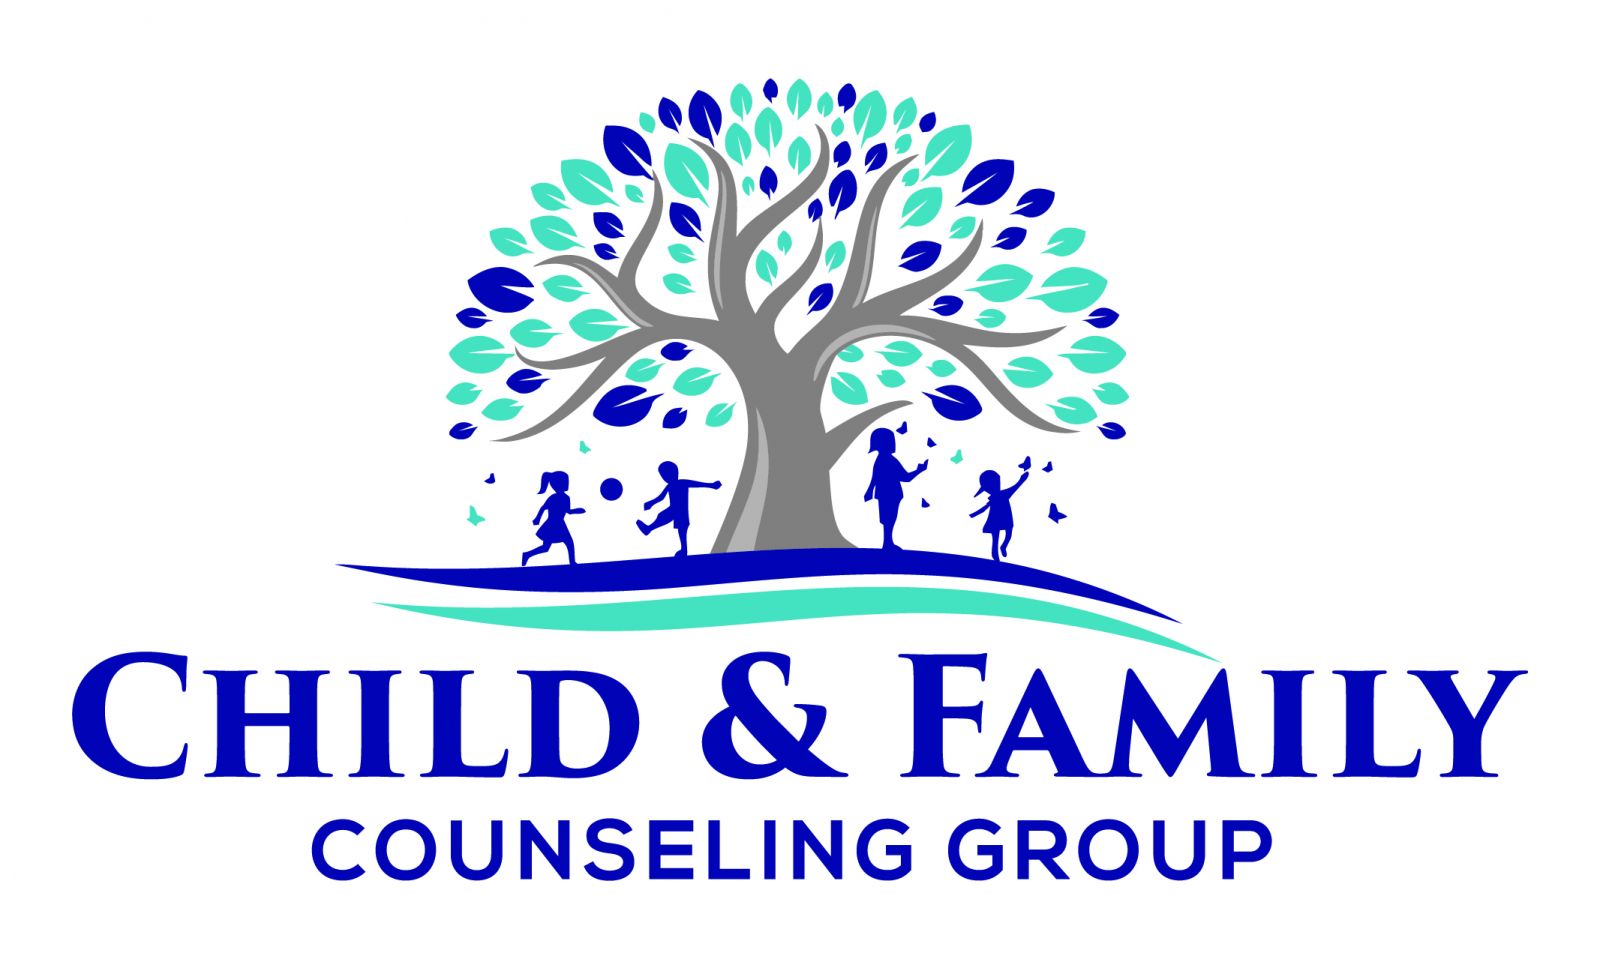 Child & Family Counseling Group logo